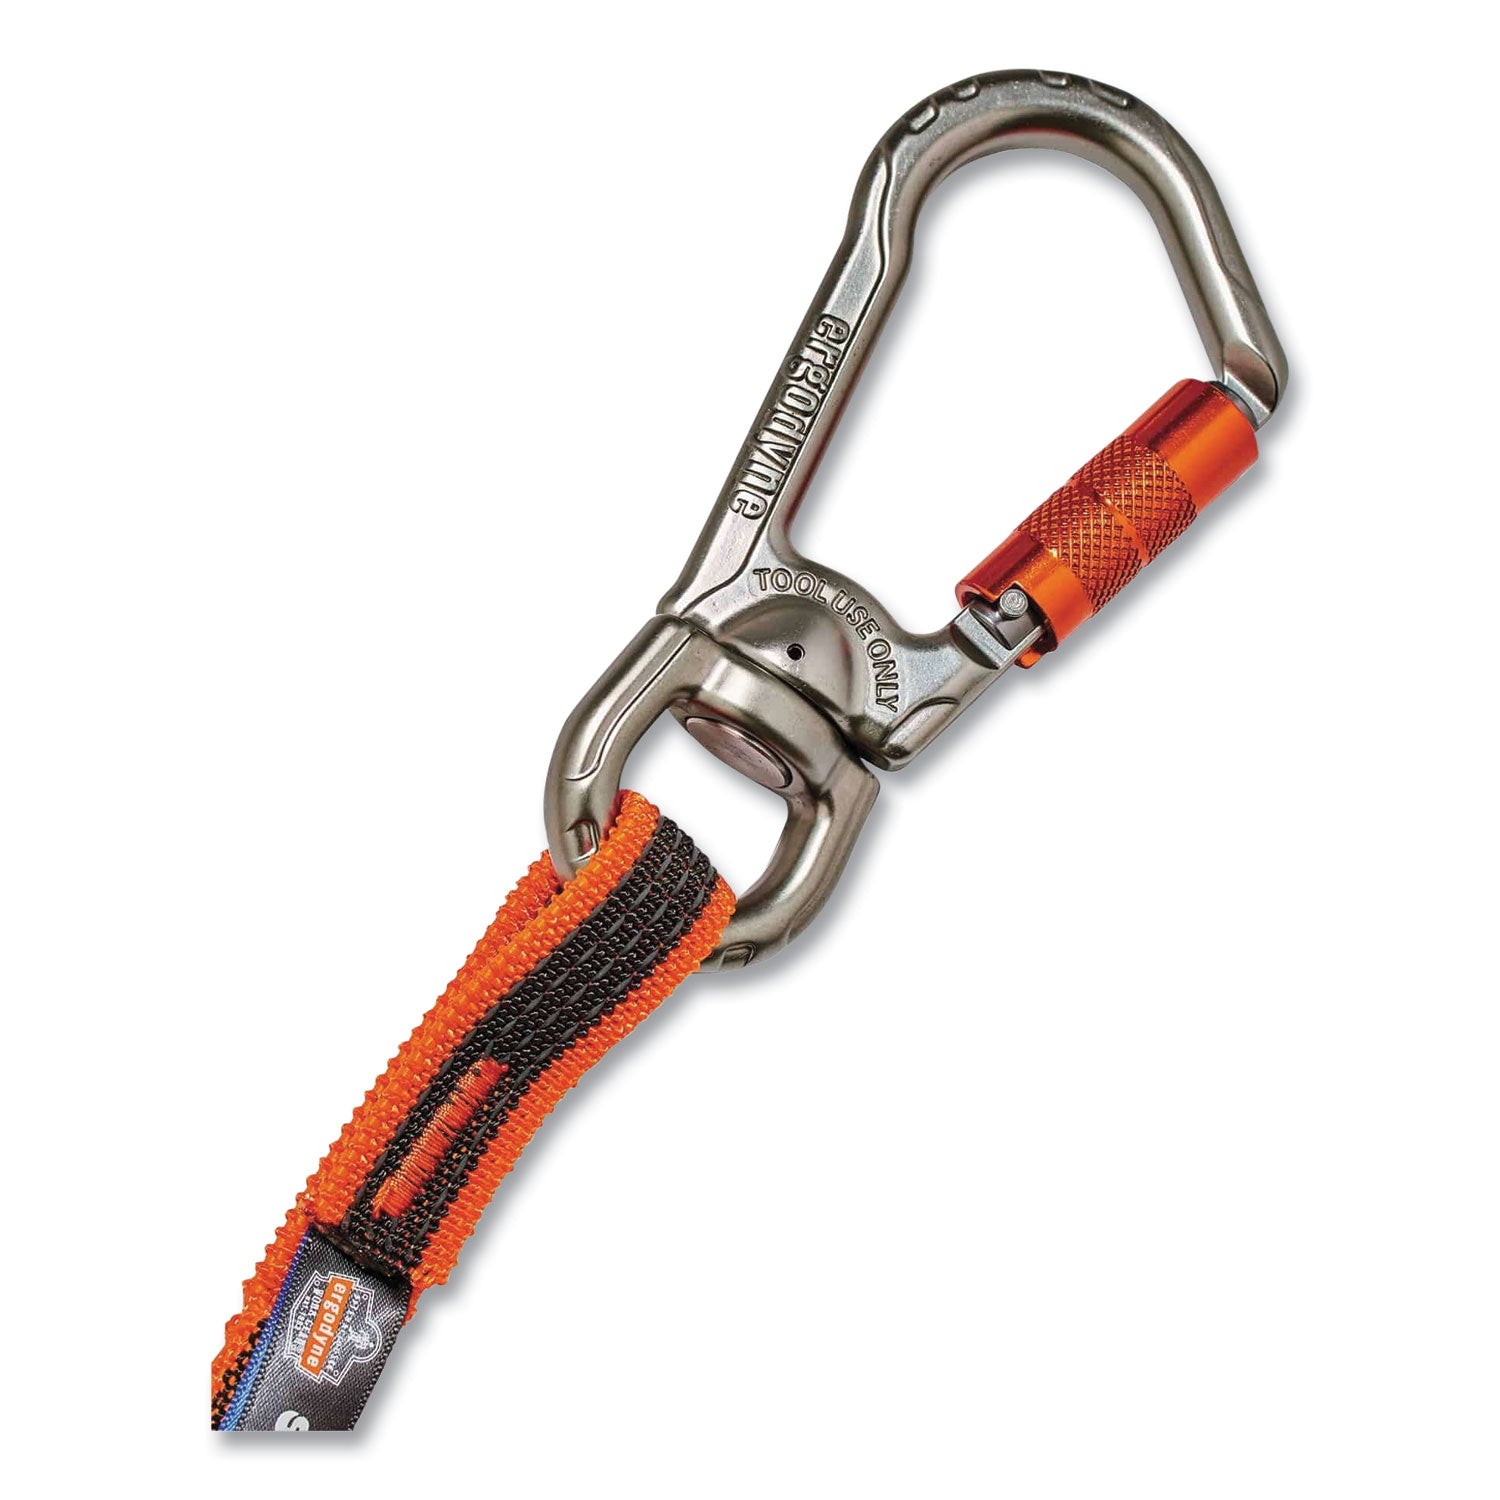 squids-3119fx-tool-lanyard-w-swiveling-aluminum-carabiners-25-lb-max-work-cap-38-to-48or-gyships-in-1-3-business-days_ego19829 - 4